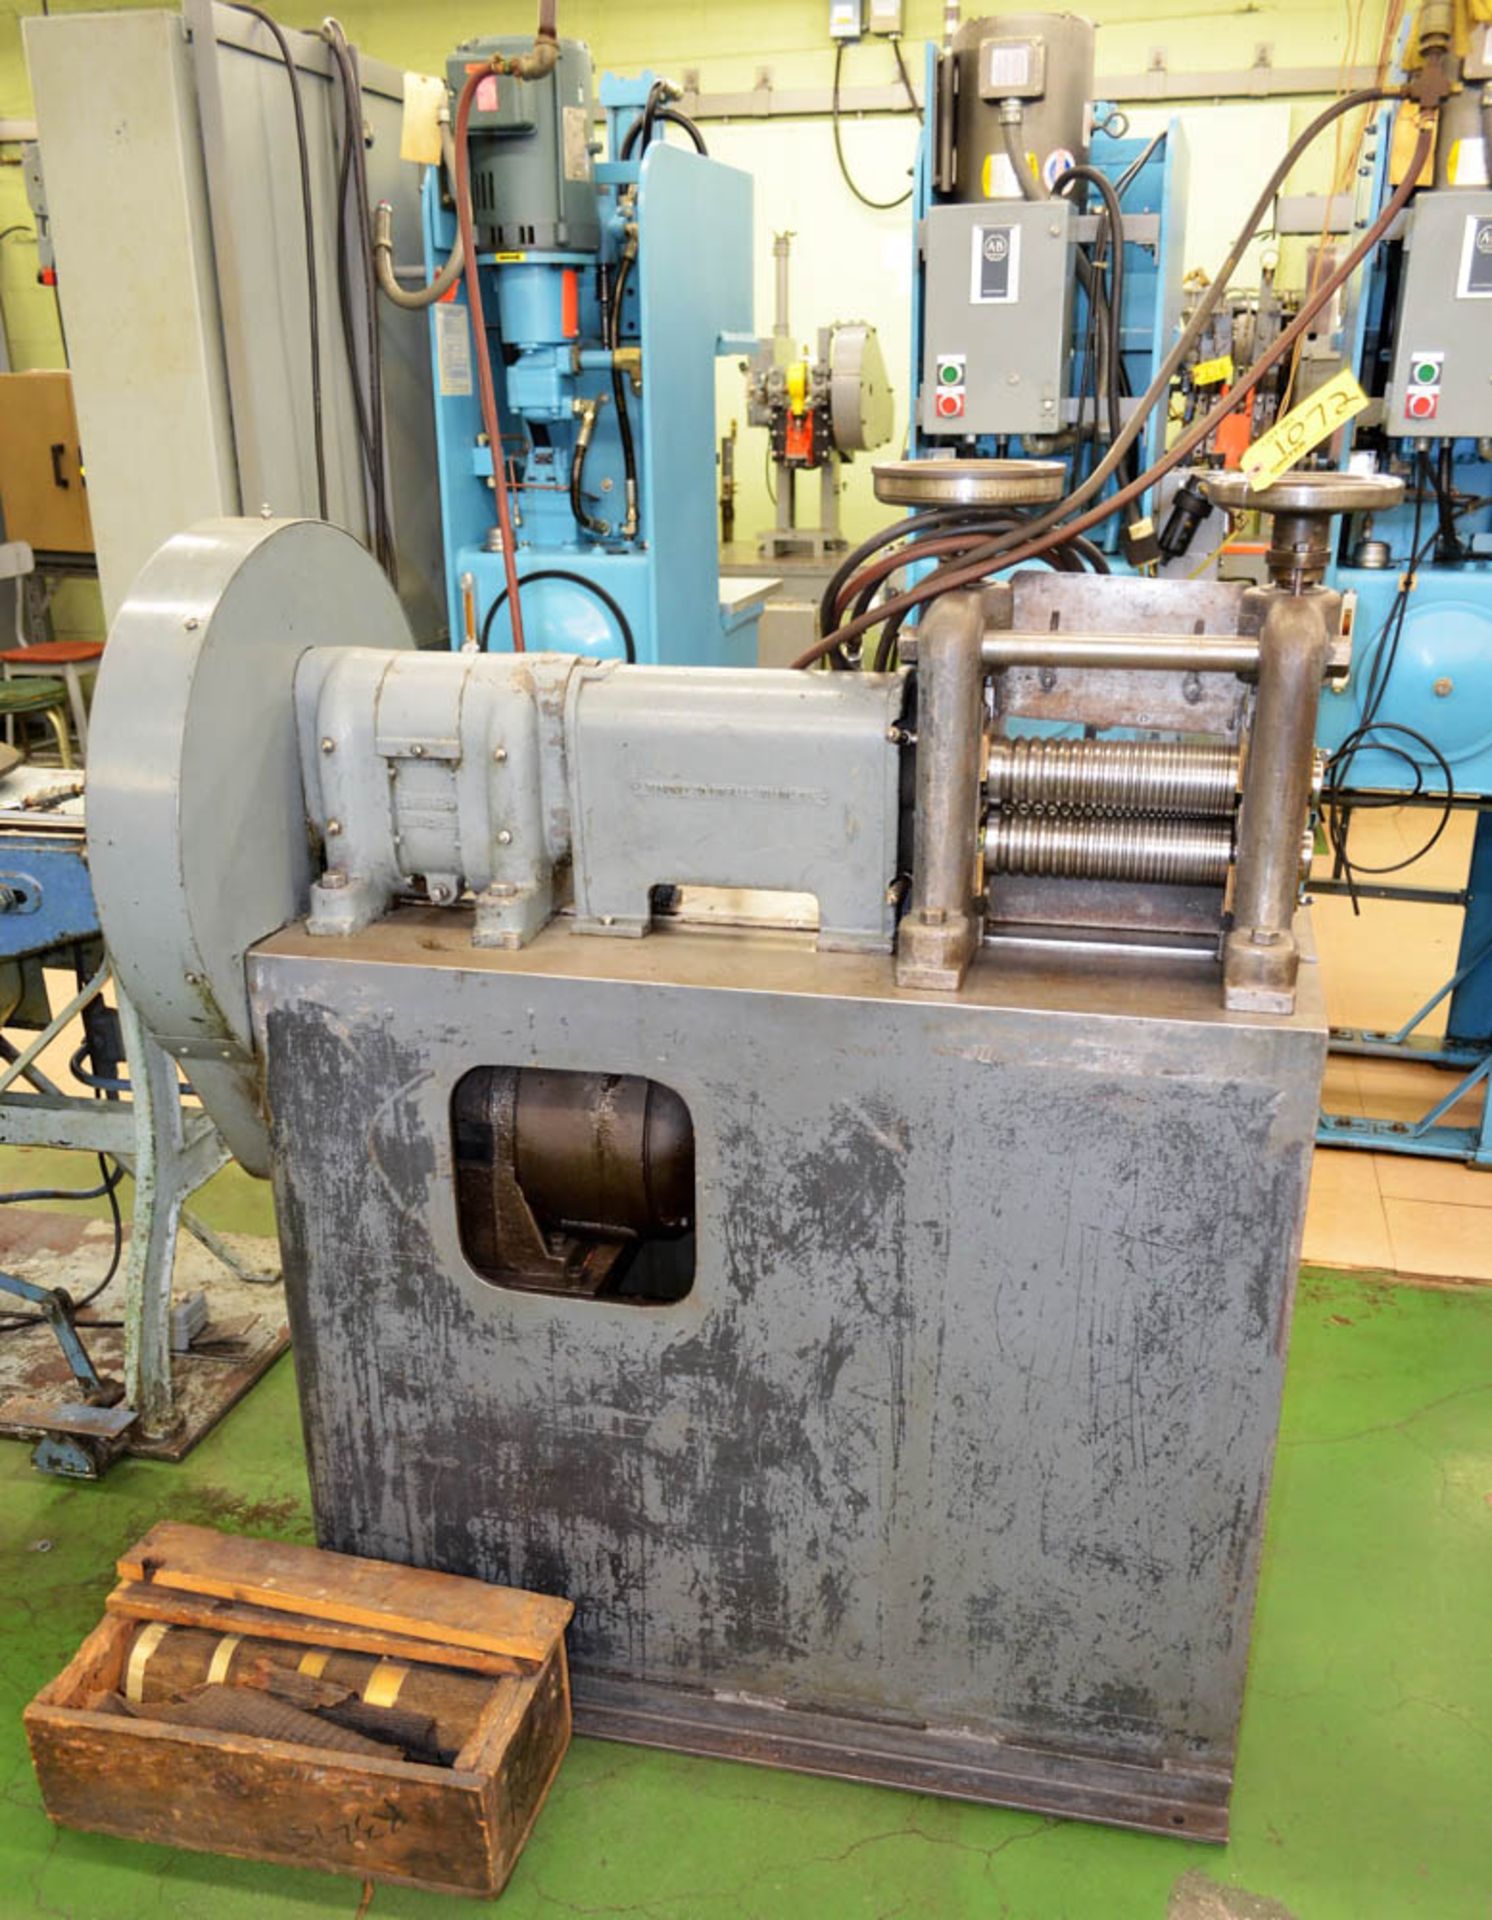 RUESCH MDL. C-37 WIRE ROLLING MILL, WITH 2-1/2" DIAMETER X 9" ROLLS, EXTRA SET OF ROLLS, S/N: 4742